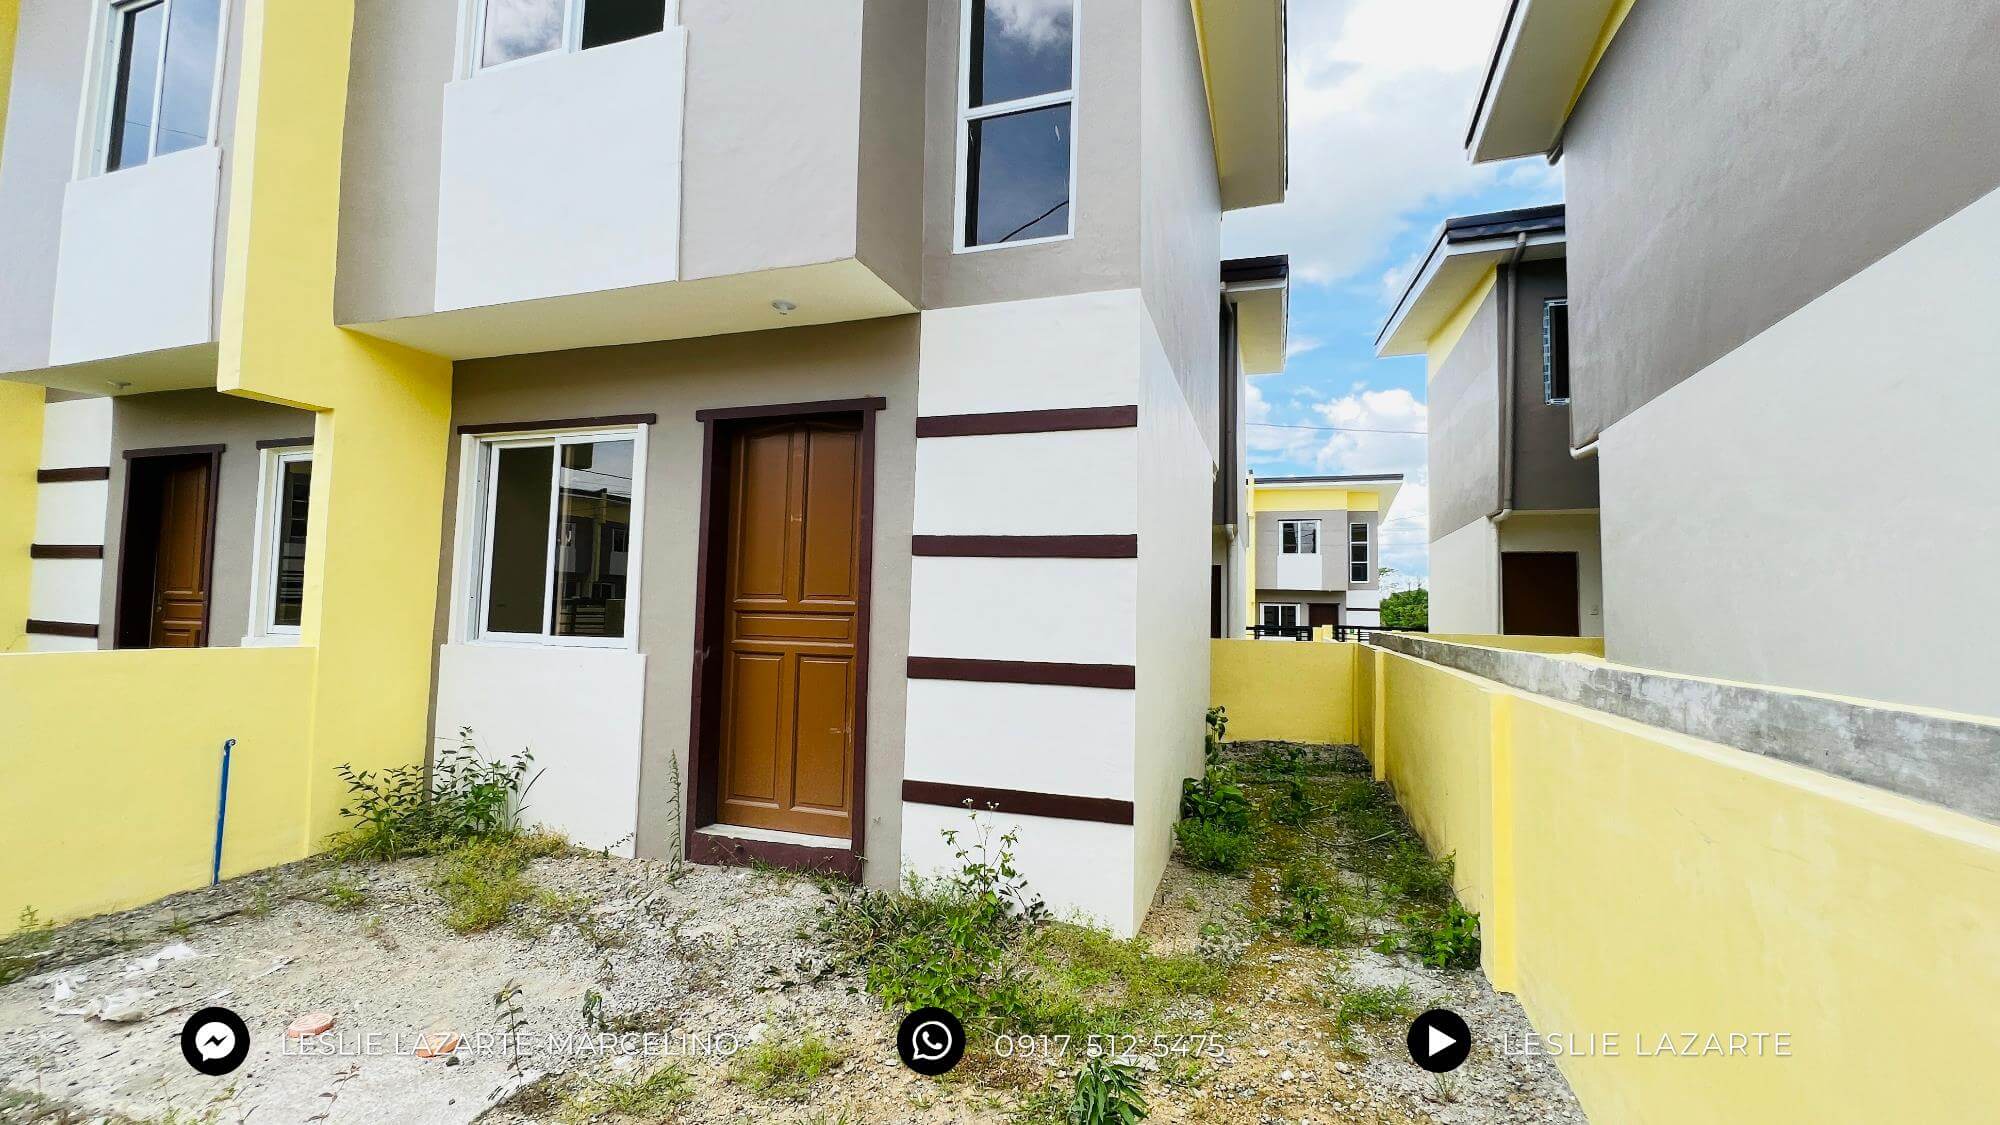 Photo of Pacifictown Executive Village - Townhouse Inner | House and Lot for Sale Pag-IBIG Trece Martires Cavite | Pacifictown Property Ventures Inc